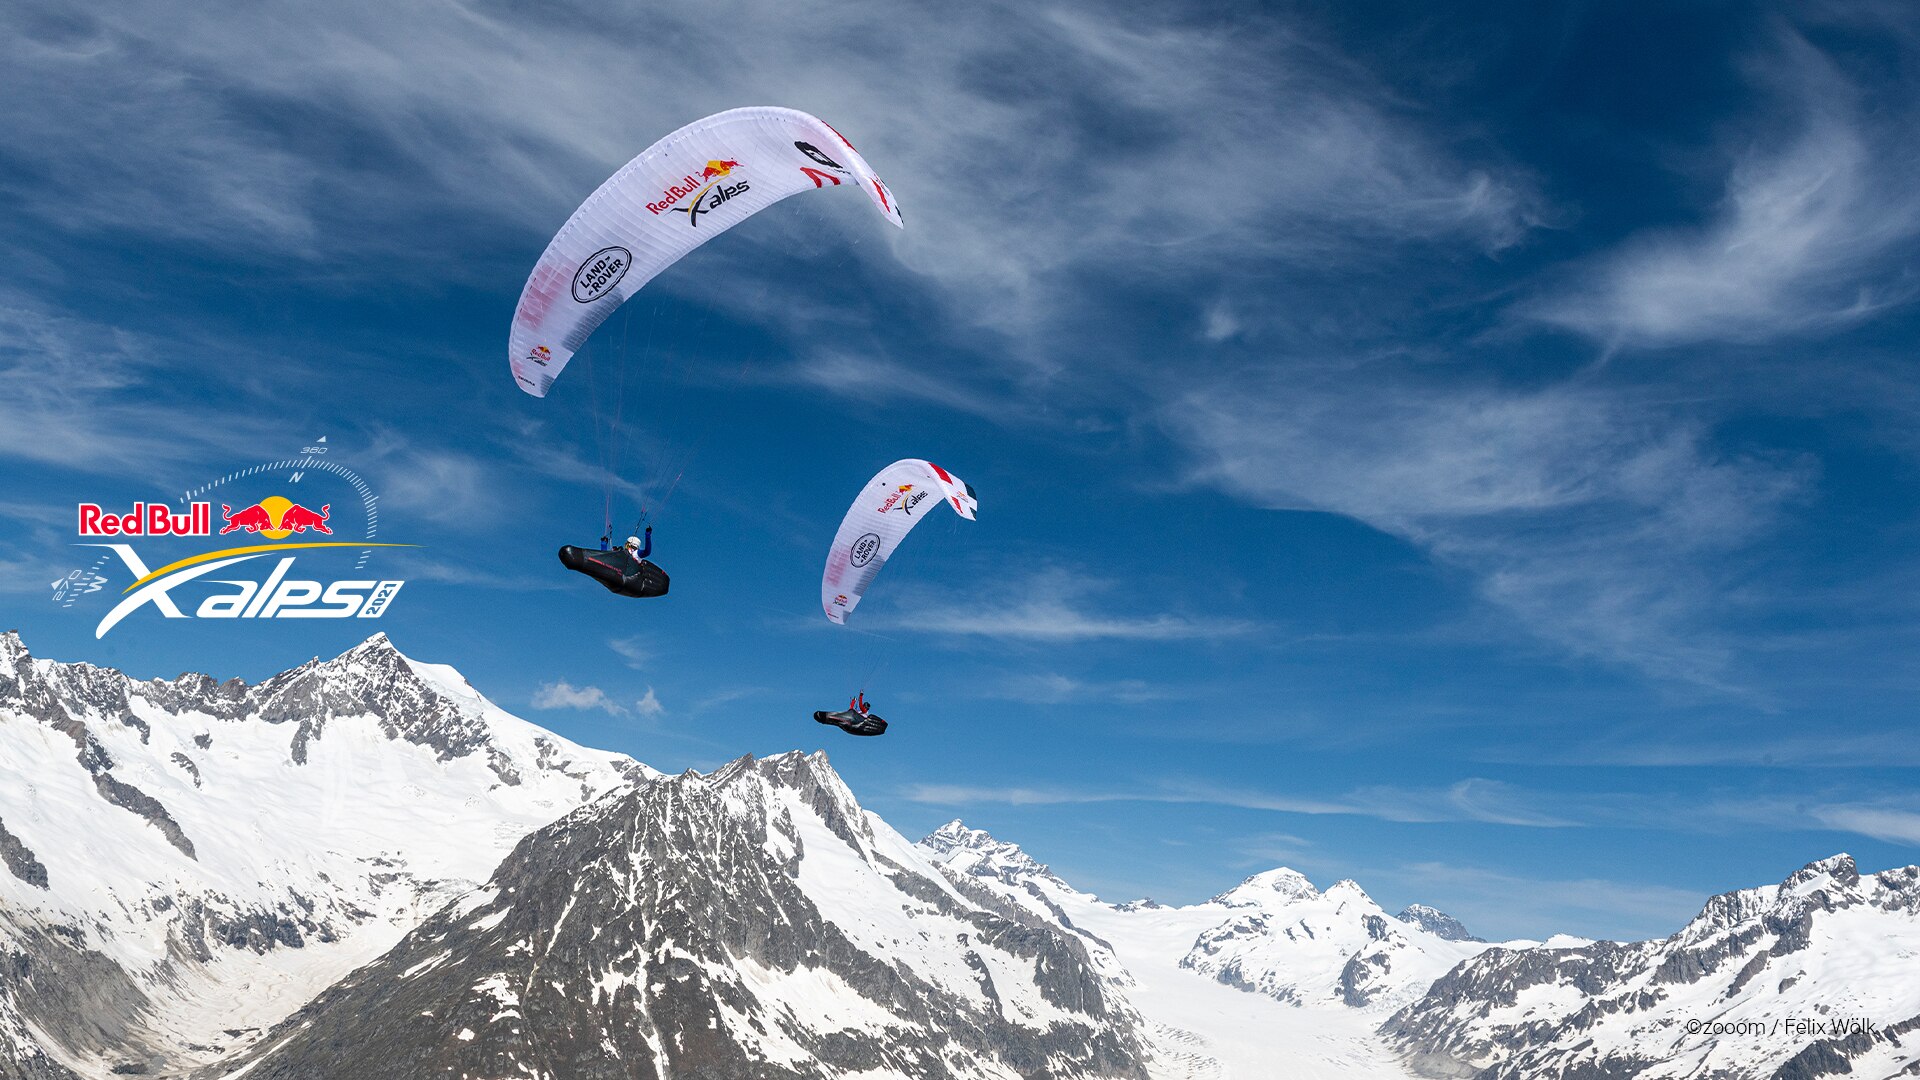 Red Bull X Alps 2021 Facebook cover 3